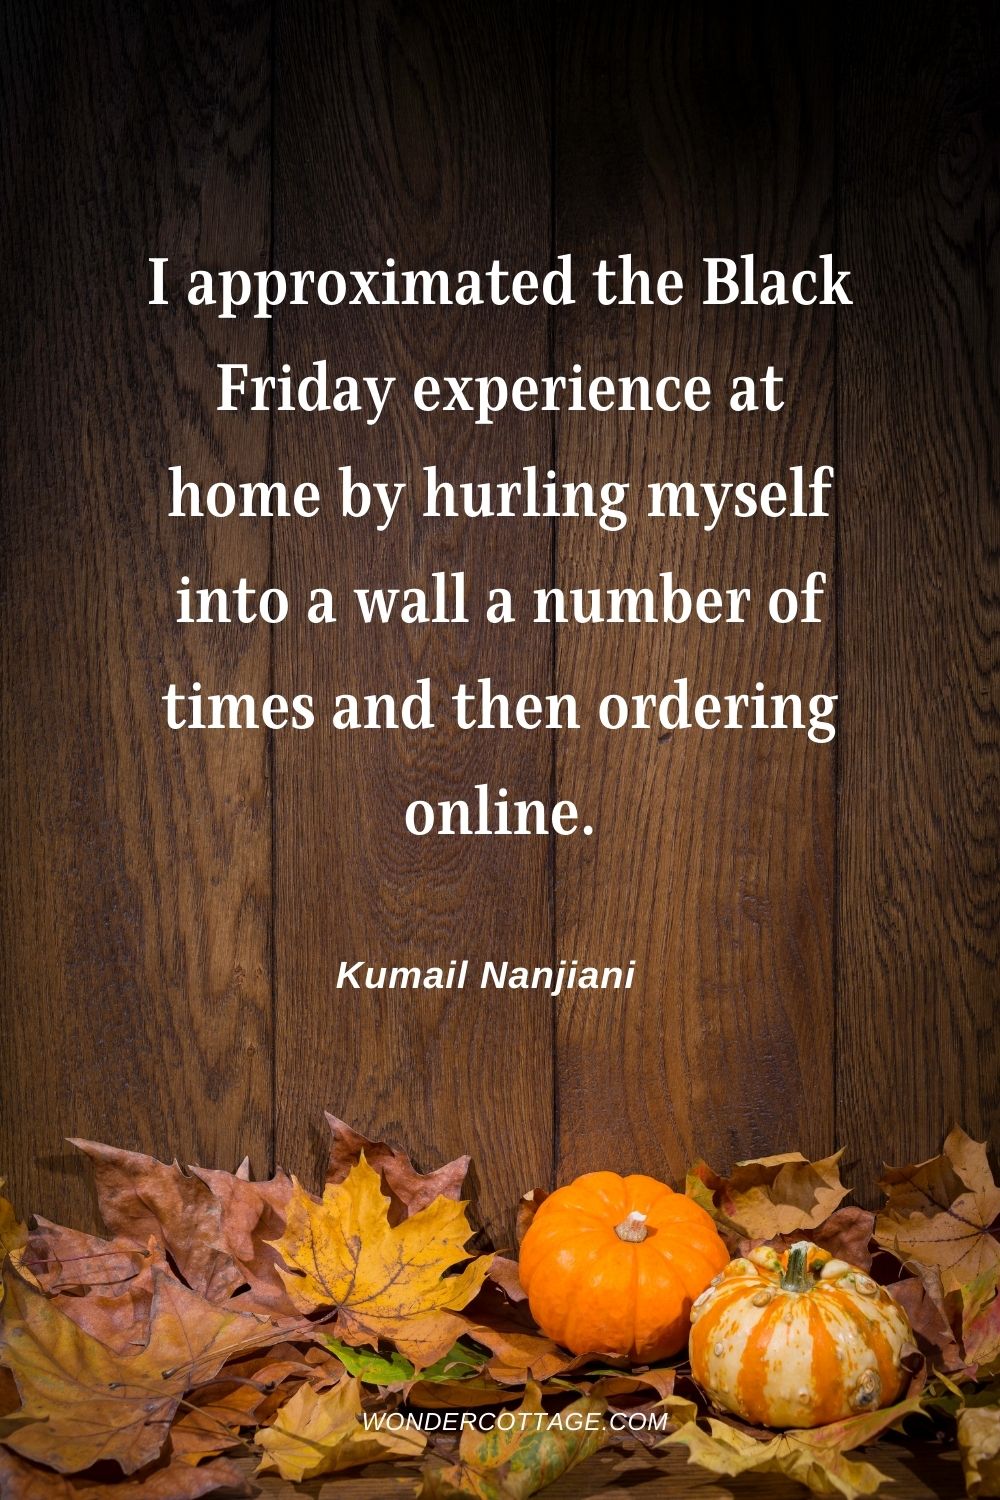 I approximated the Black Friday experience at home by hurling myself into a wall a number of times and then ordering online. Kumail Nanjiani